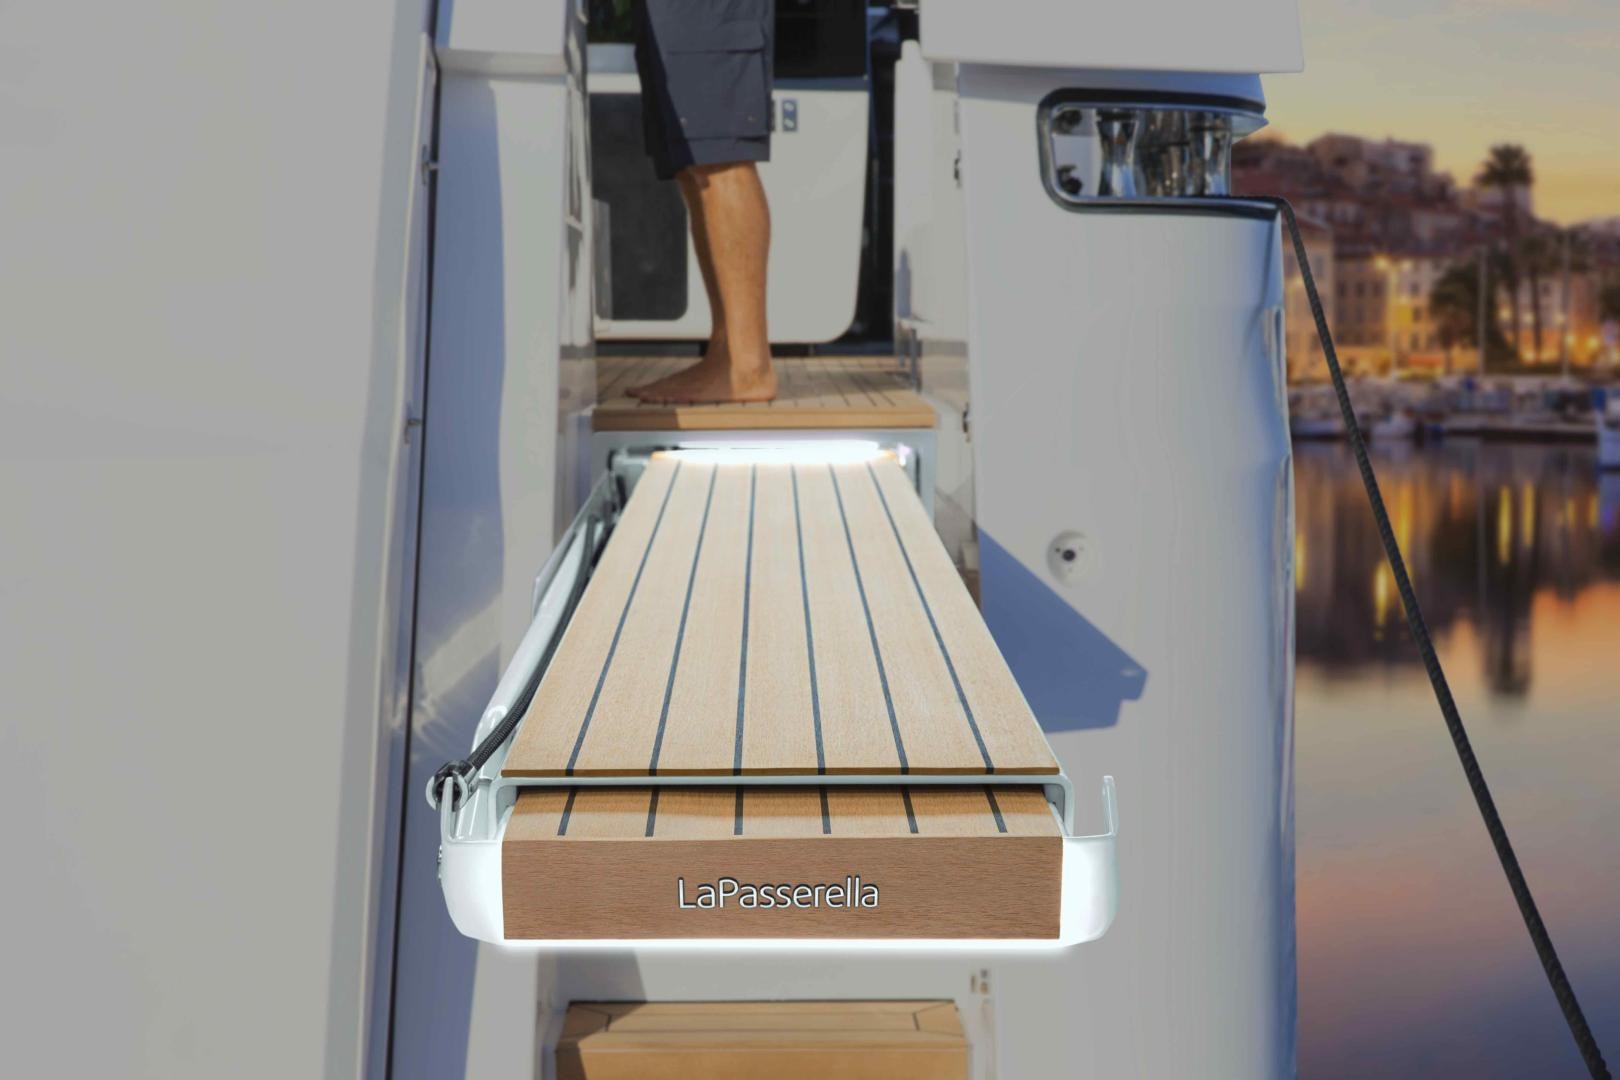 Besenzoni is launching LaPasserella, completely electric gangway